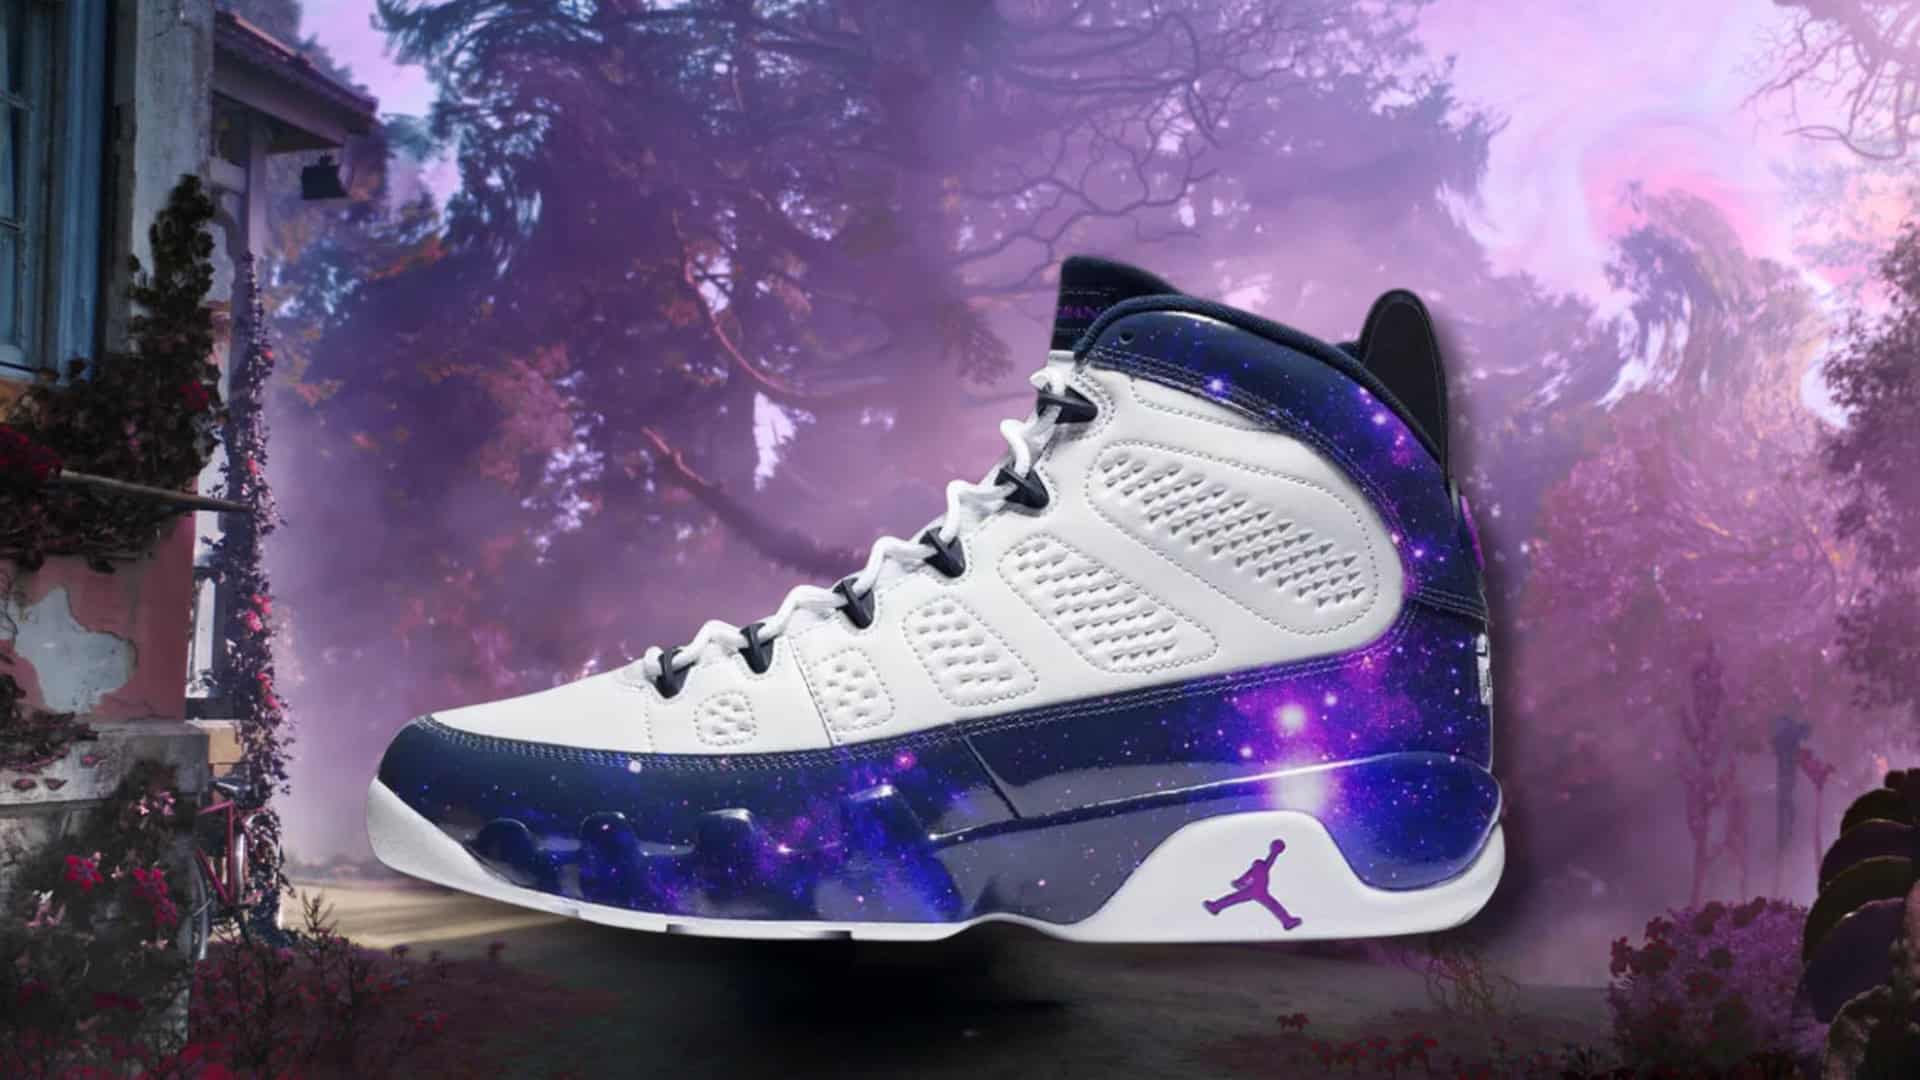 Nike Air Jordan 9 “Galaxy” Sneakers Are Out Of This World